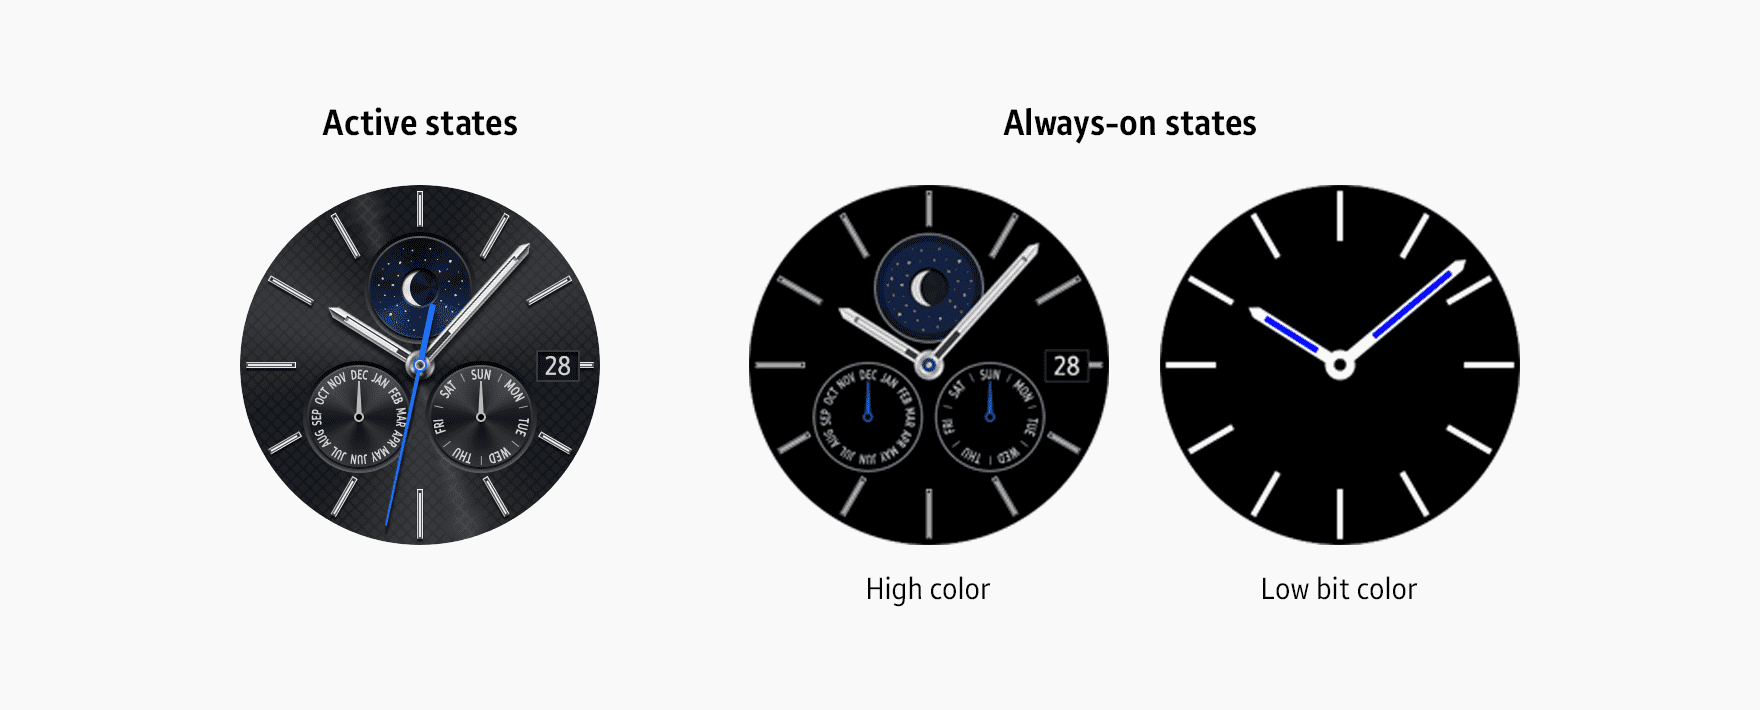 The appearance of watch face designs may vary depending on the color mode and state.